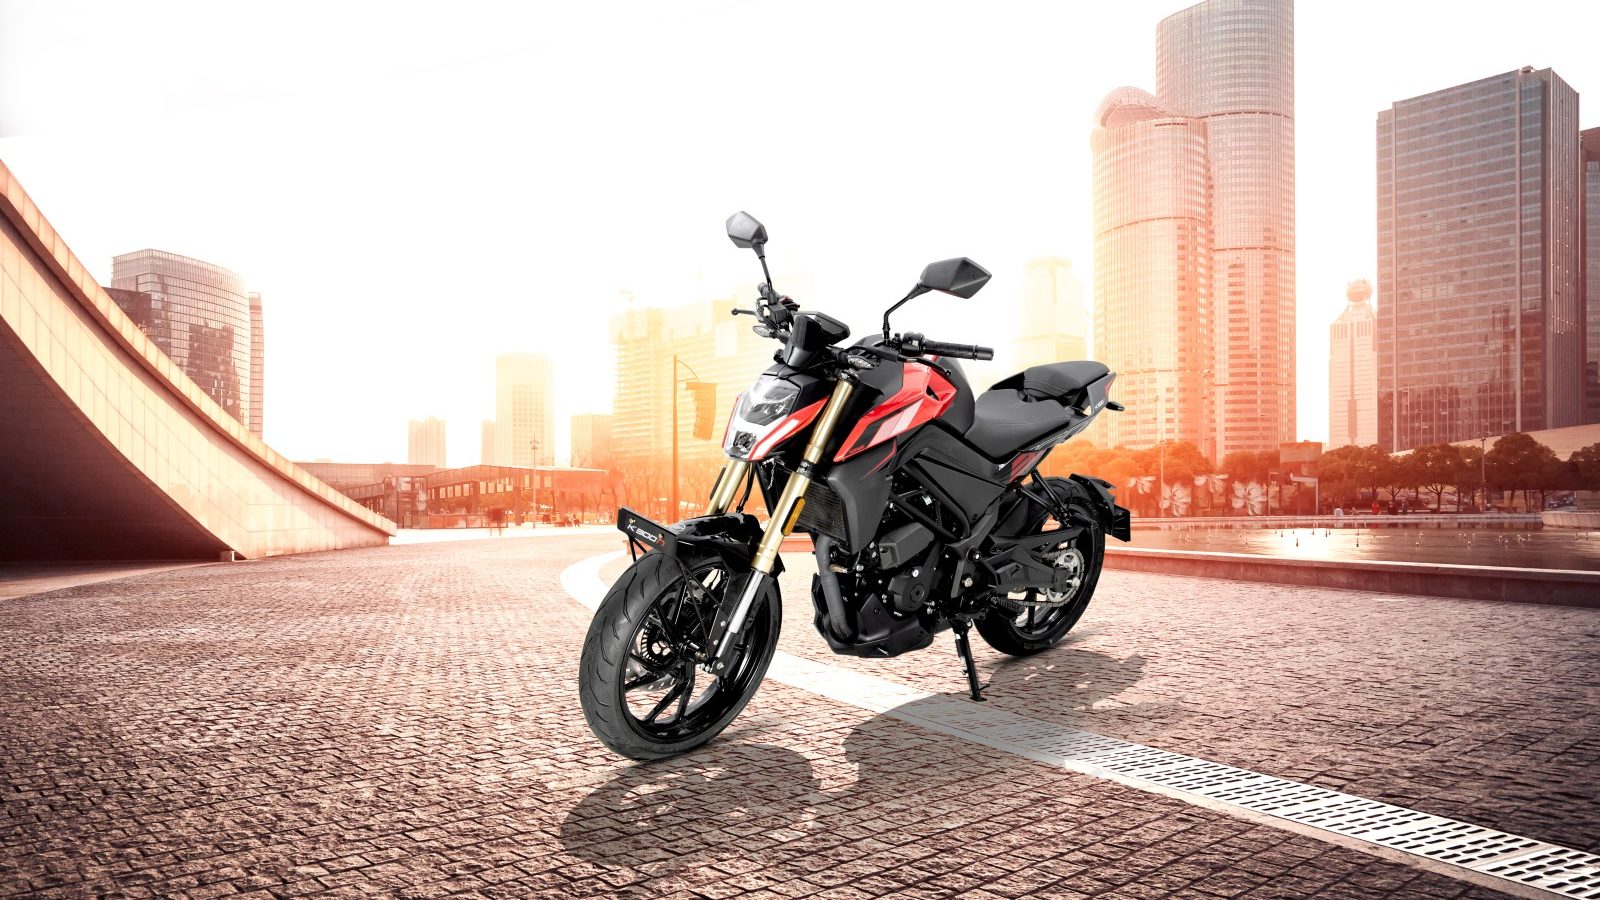 Keeway K300 N and K300 R Launched in India; Details Inside